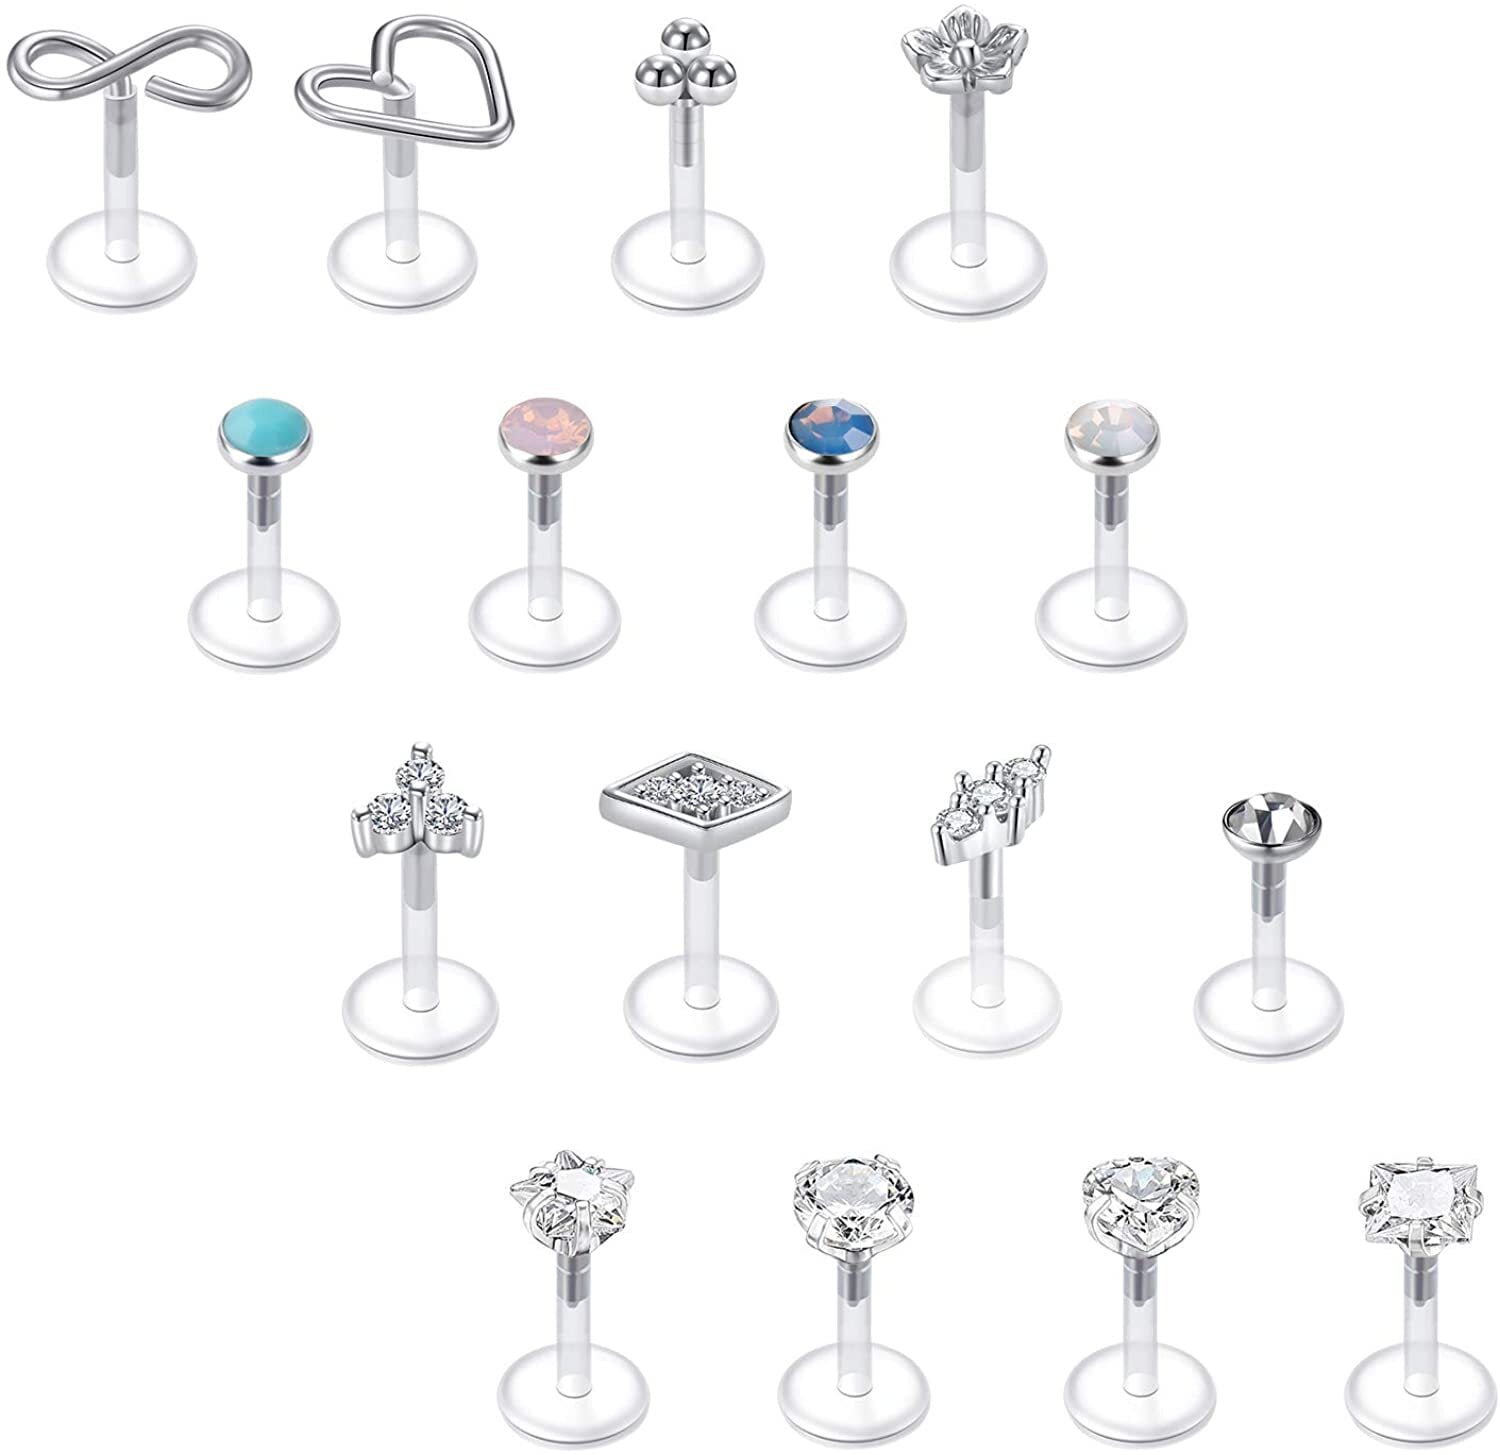 Briana Williams Cartilage Tragus Helix Earrings Set Industrial Barbell Piercing Jewelry 